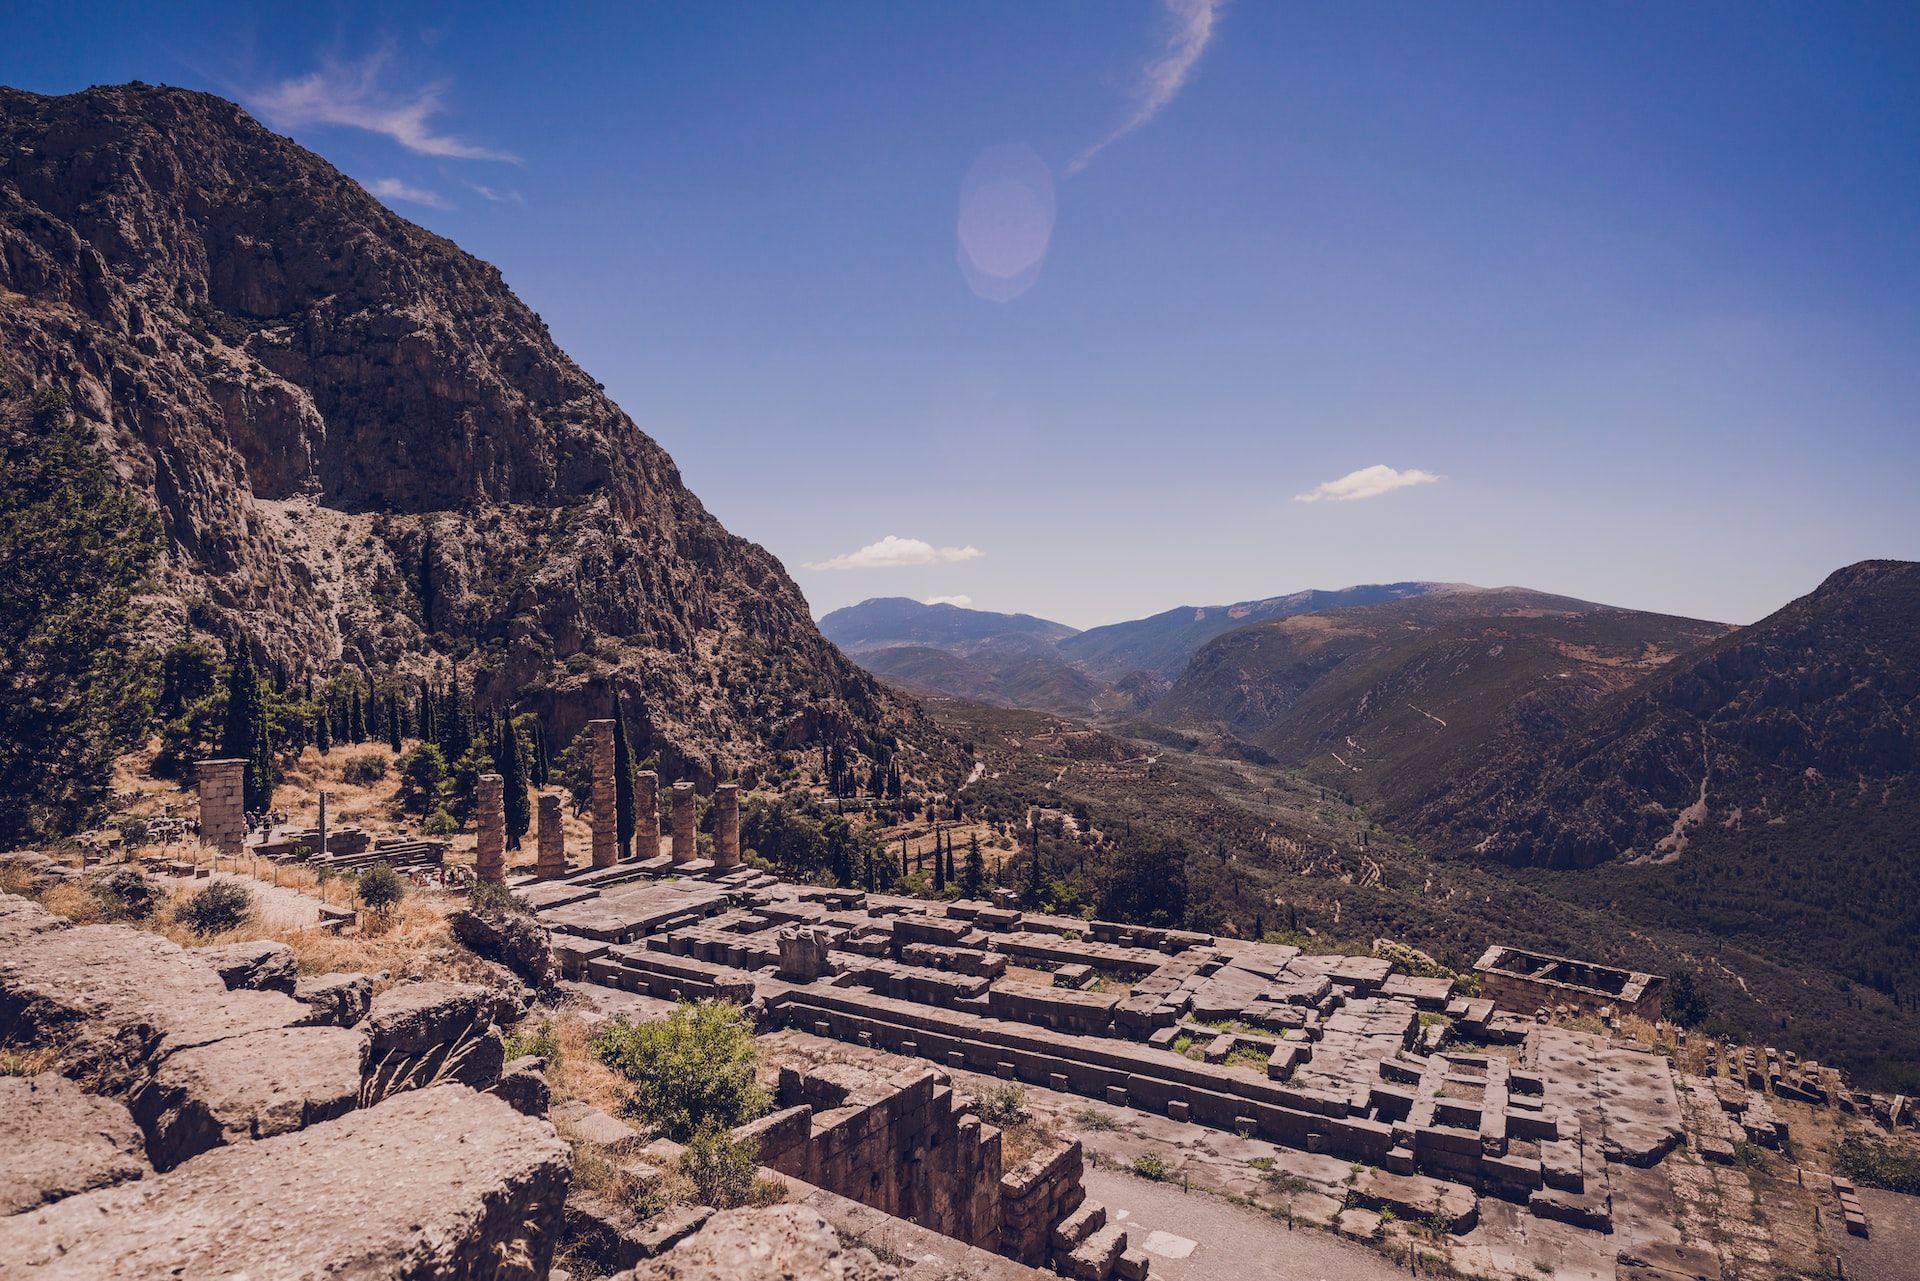 The ancient ruins at Delphi, Greece, against a dramatic backdrops of undulating hills and valleys